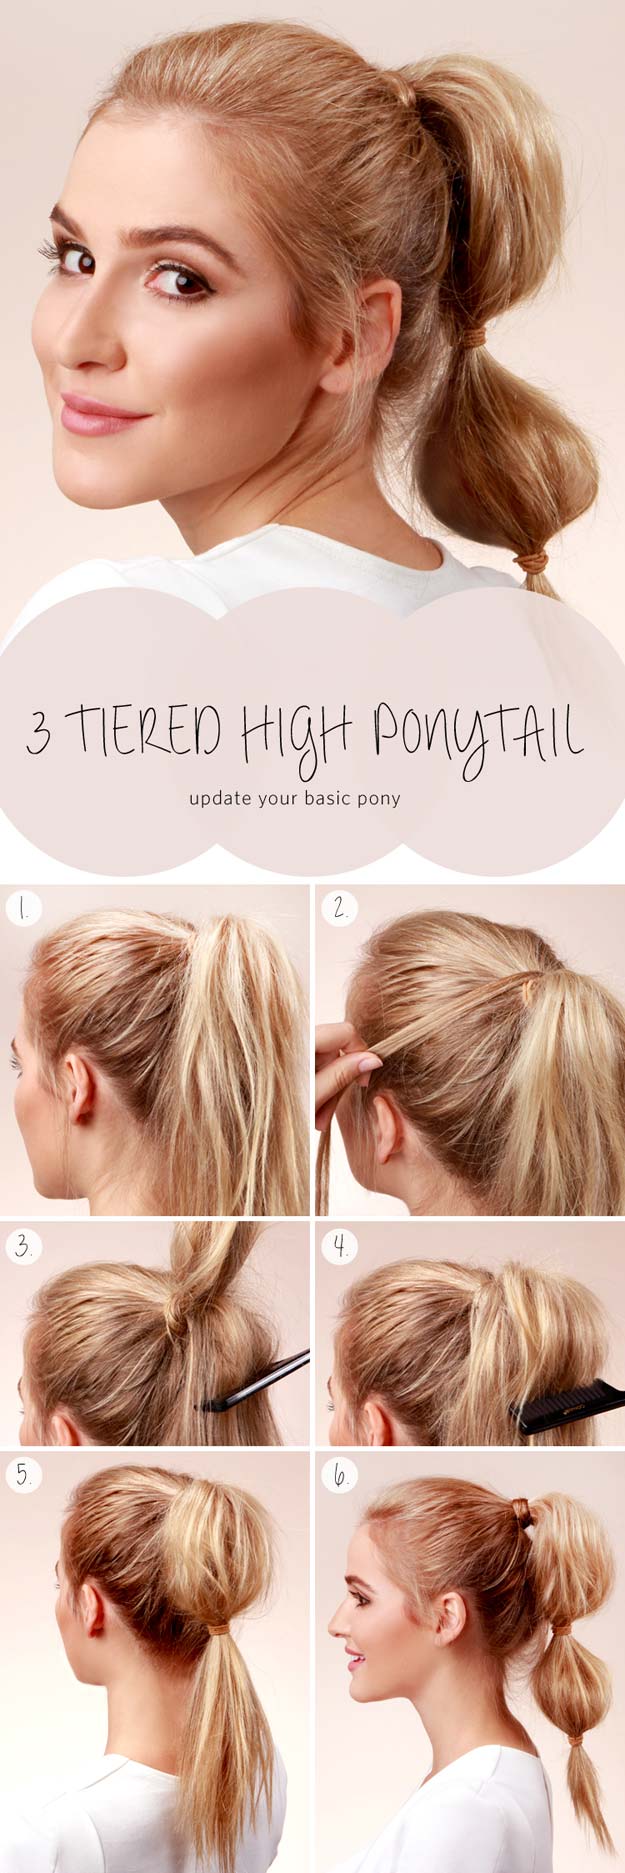 Best Hairstyles for Long Hair - Three Tiered High Ponytail- Step by Step Tutorials for Easy Curls, Updo, Half Up, Braids and Lazy Girl Looks. Prom Ideas, Special Occasion Hair and Braiding Instructions for Teens, Teenagers and Adults, Women and Girls 